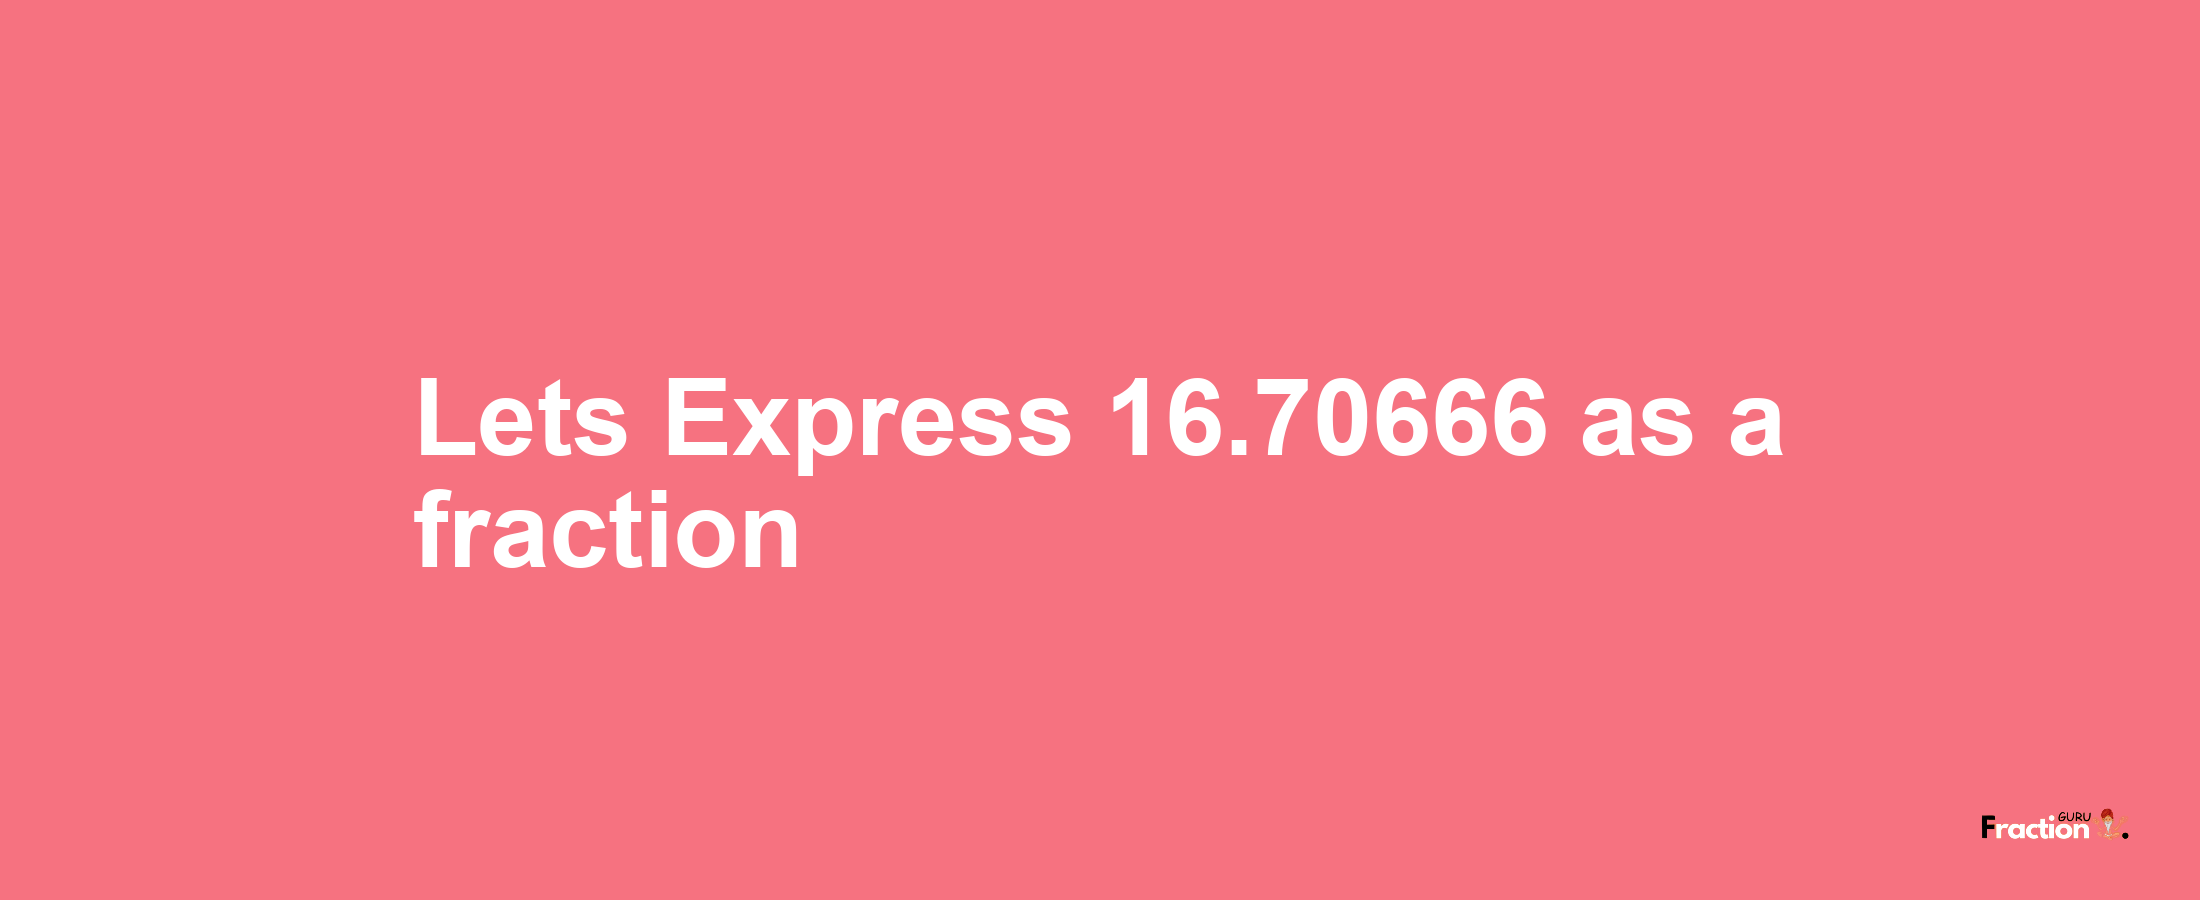 Lets Express 16.70666 as afraction